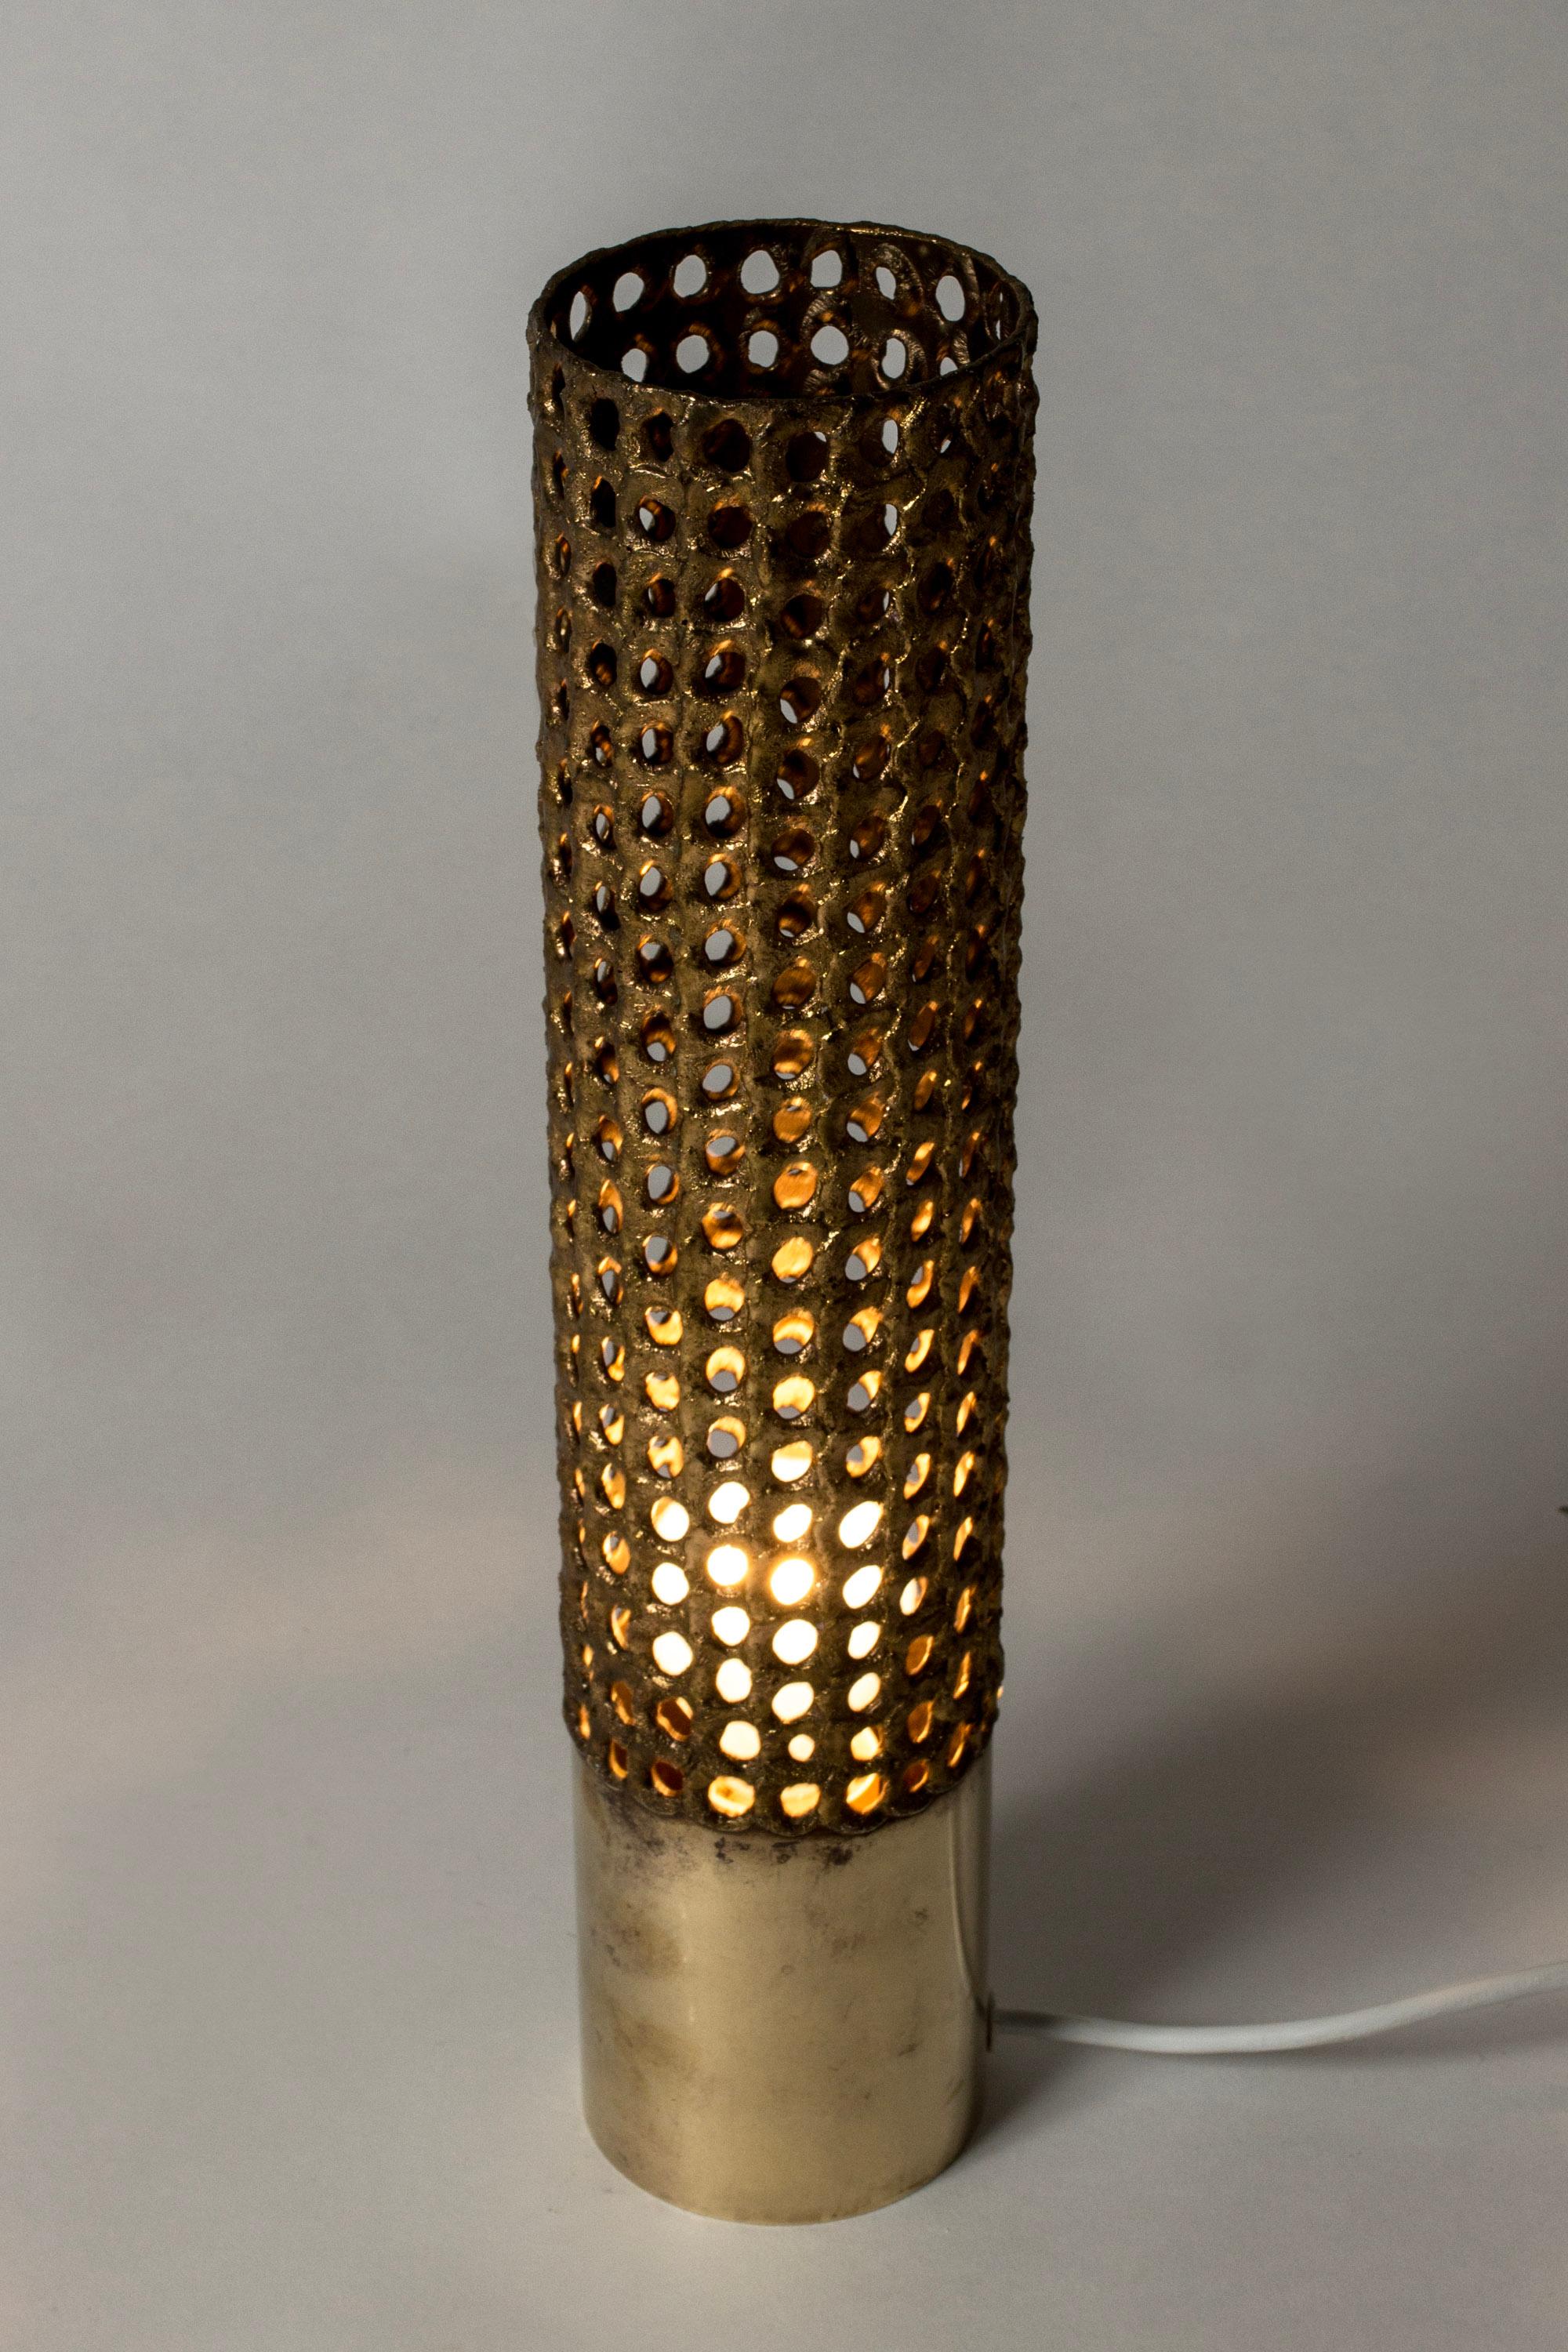 Amazing brass table lamp in a brutalist design by Pierre Forssell. With this design Pierre Forssell presented a whole new way of using brass in lighting and decorative objects. Executed by the craftsman Frans Goldberg in Pierre Forssell’s studio at